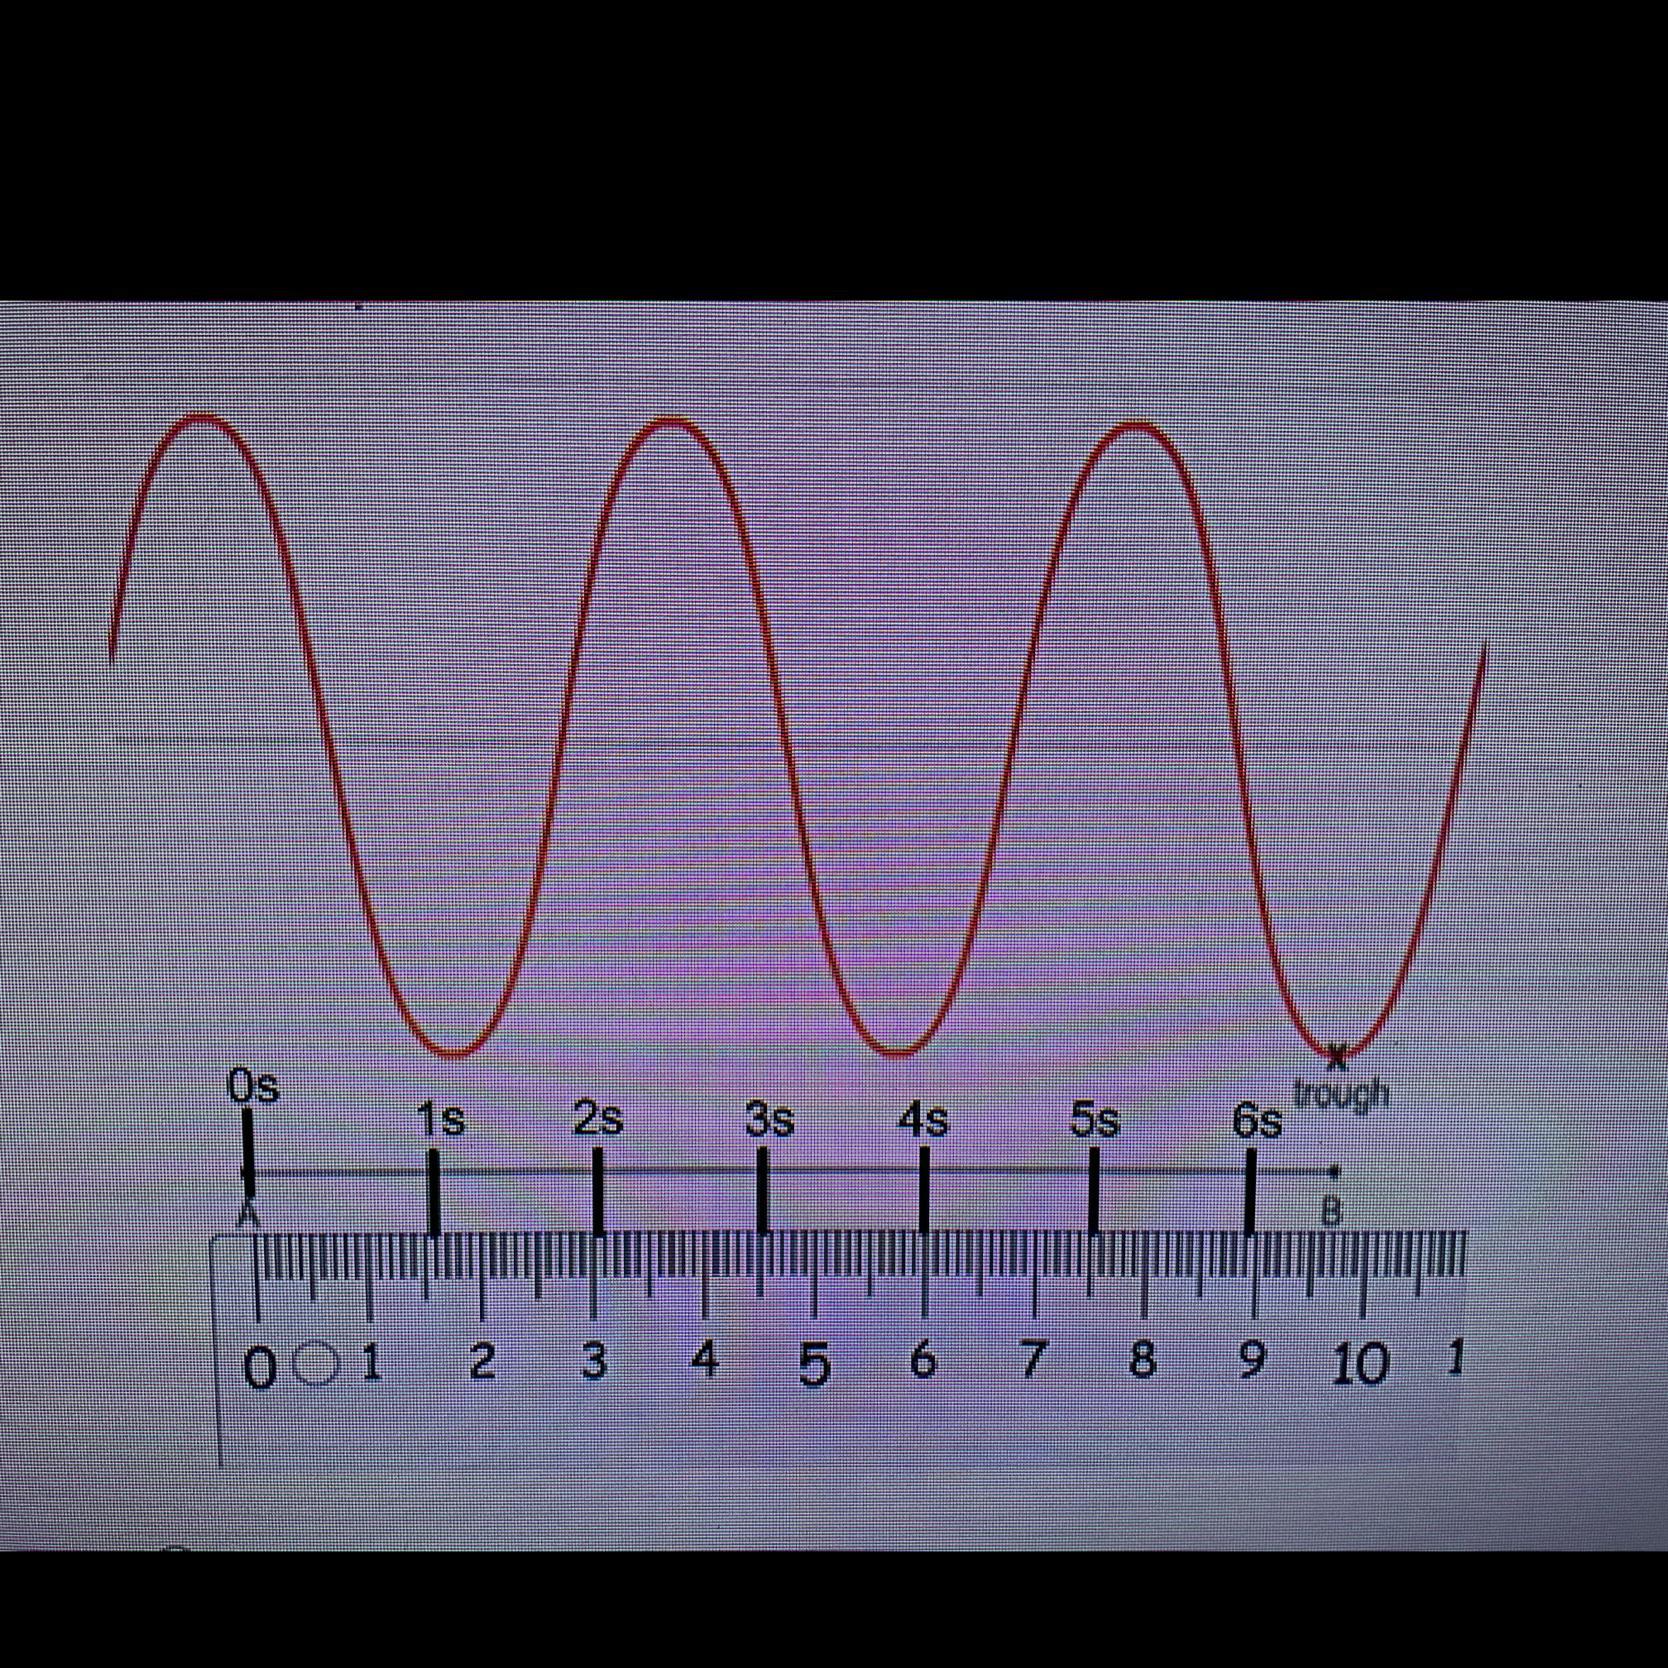 What Is The Period Of The Wave?2.5 Seconds0.4 Cycles/second (hertz)3.9 Cm1.6 Cm/s